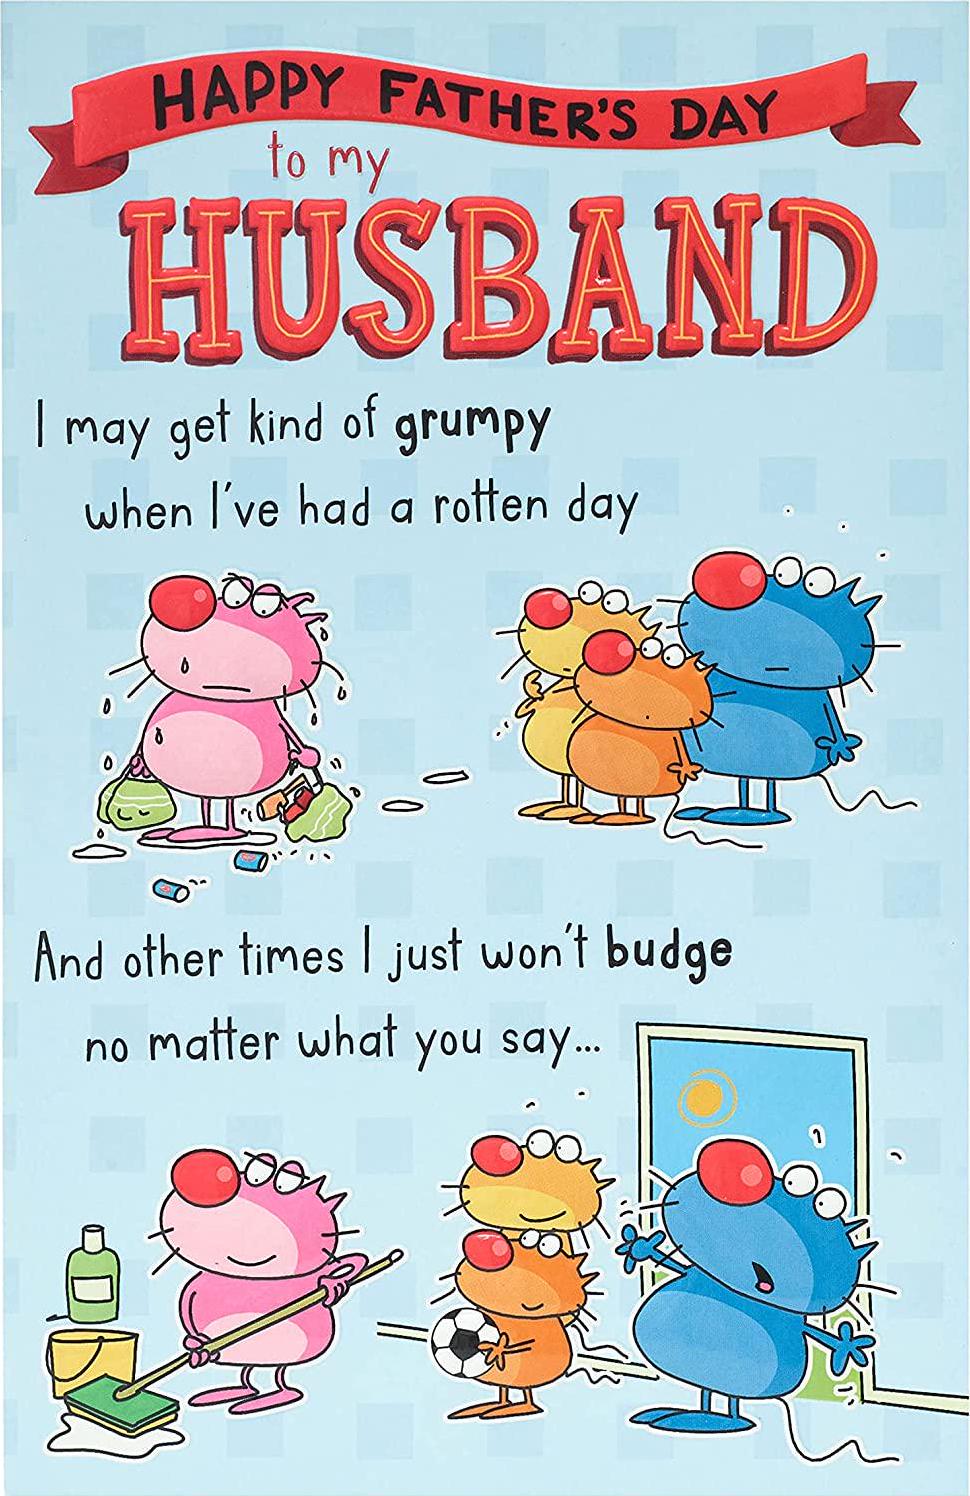 UK Greetings, Father's Day Card - To My Husband Father's Day Card - Funny Father's Day Card - Joke Father's Day Card - Father's Day Card foe Husband